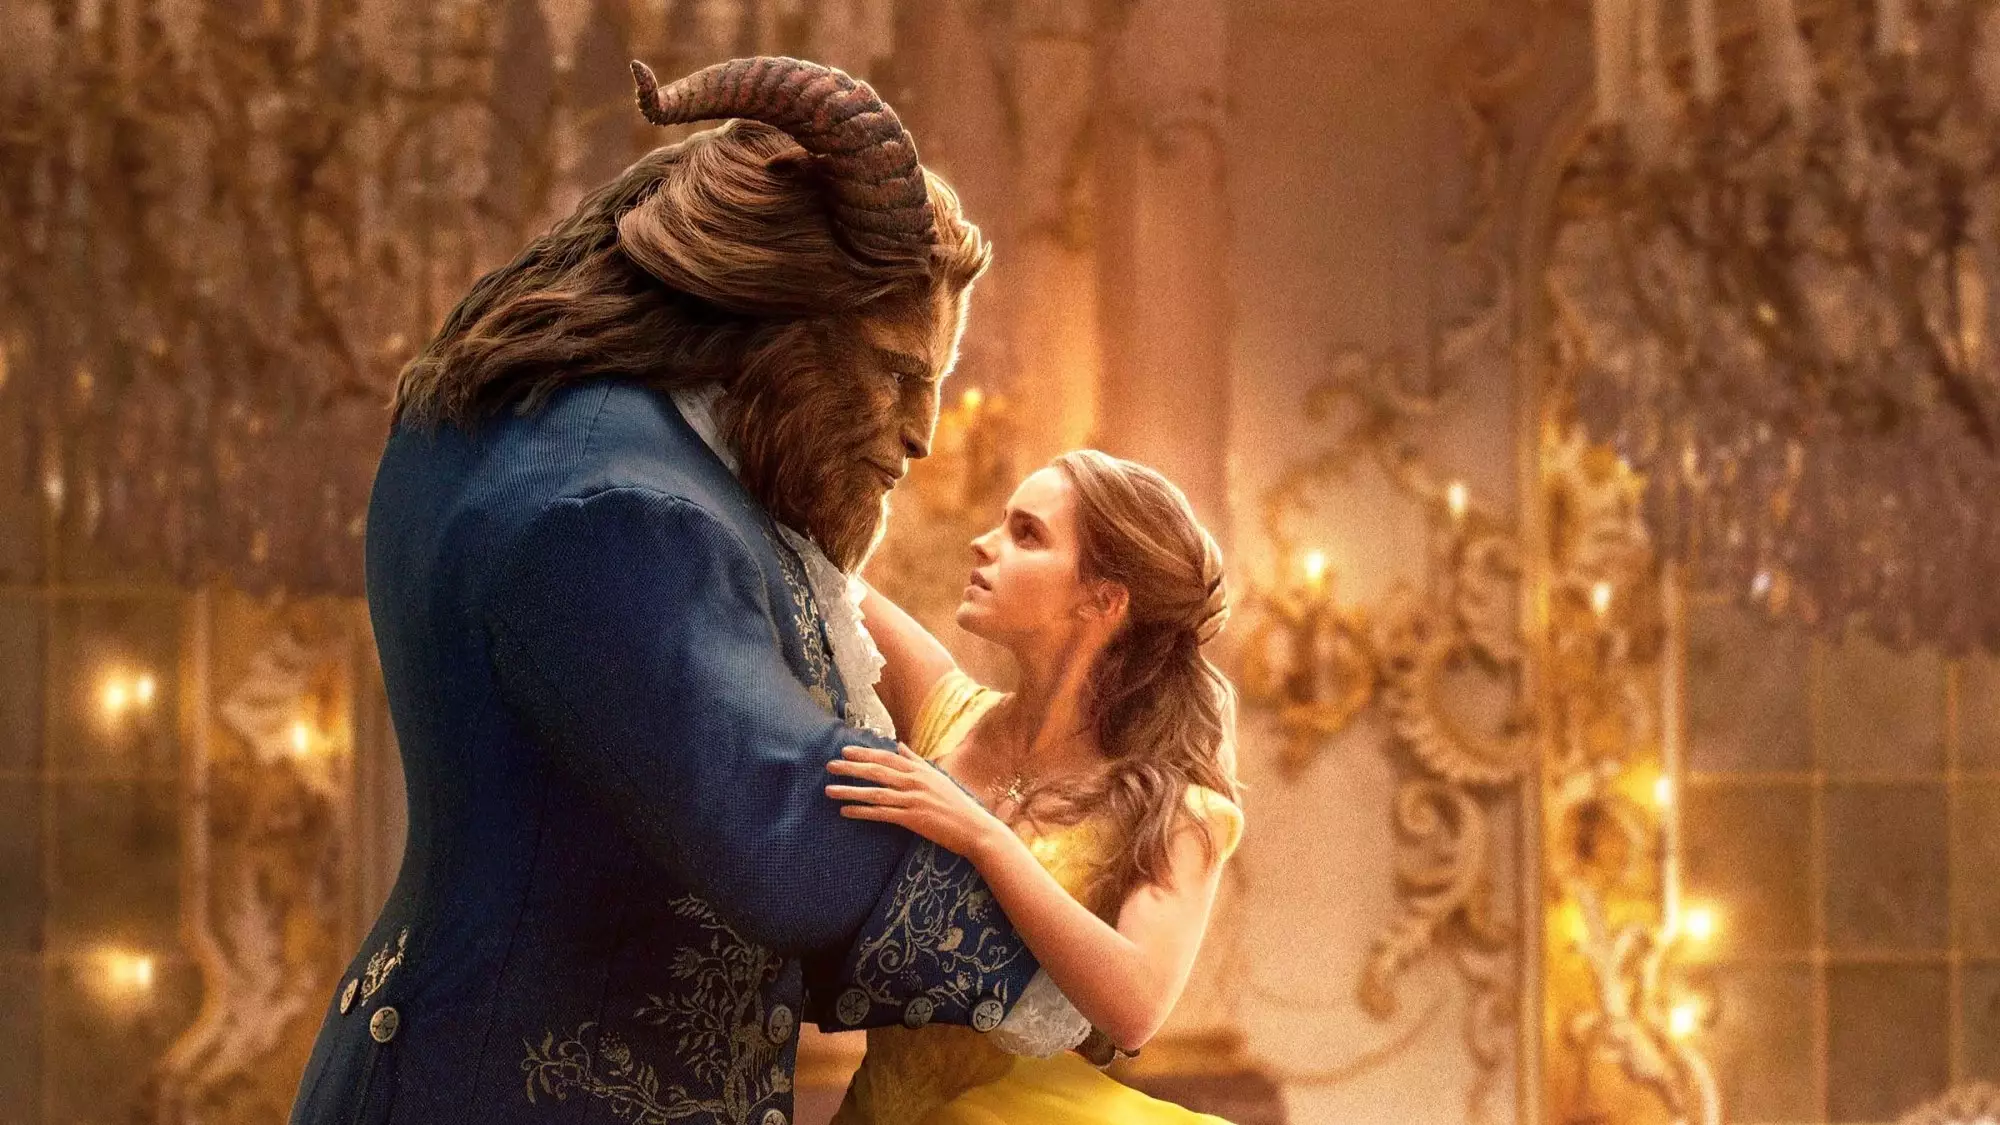 A New Beauty And The Beast Musical Is Coming To The UK Next Year